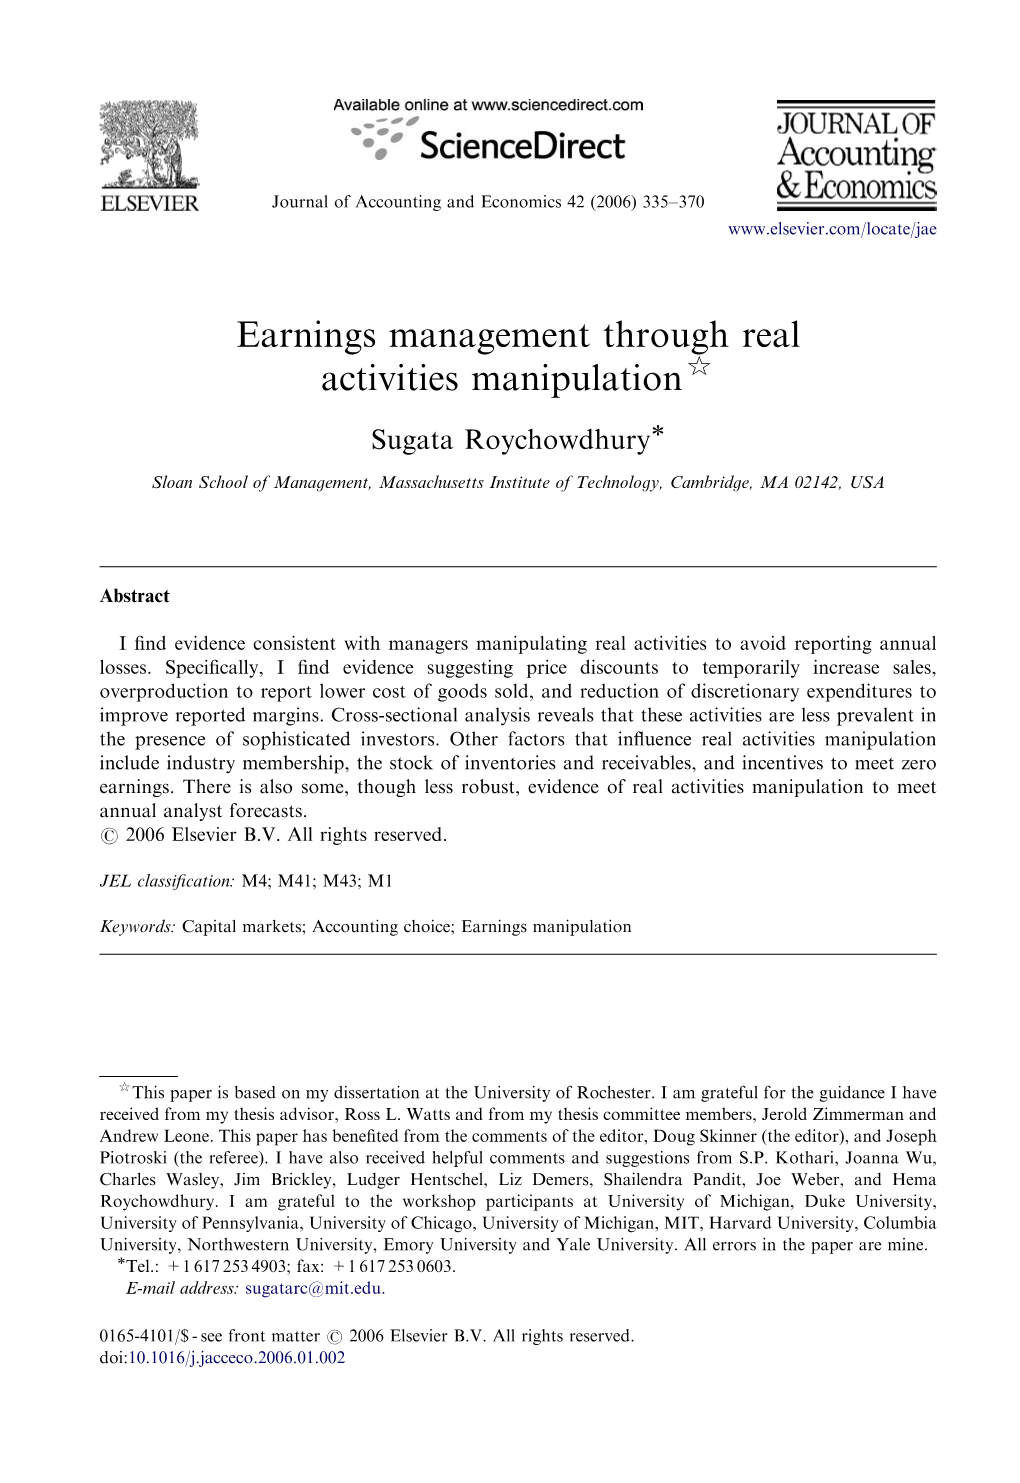 Earnings Management Through Real Activities Manipulation$